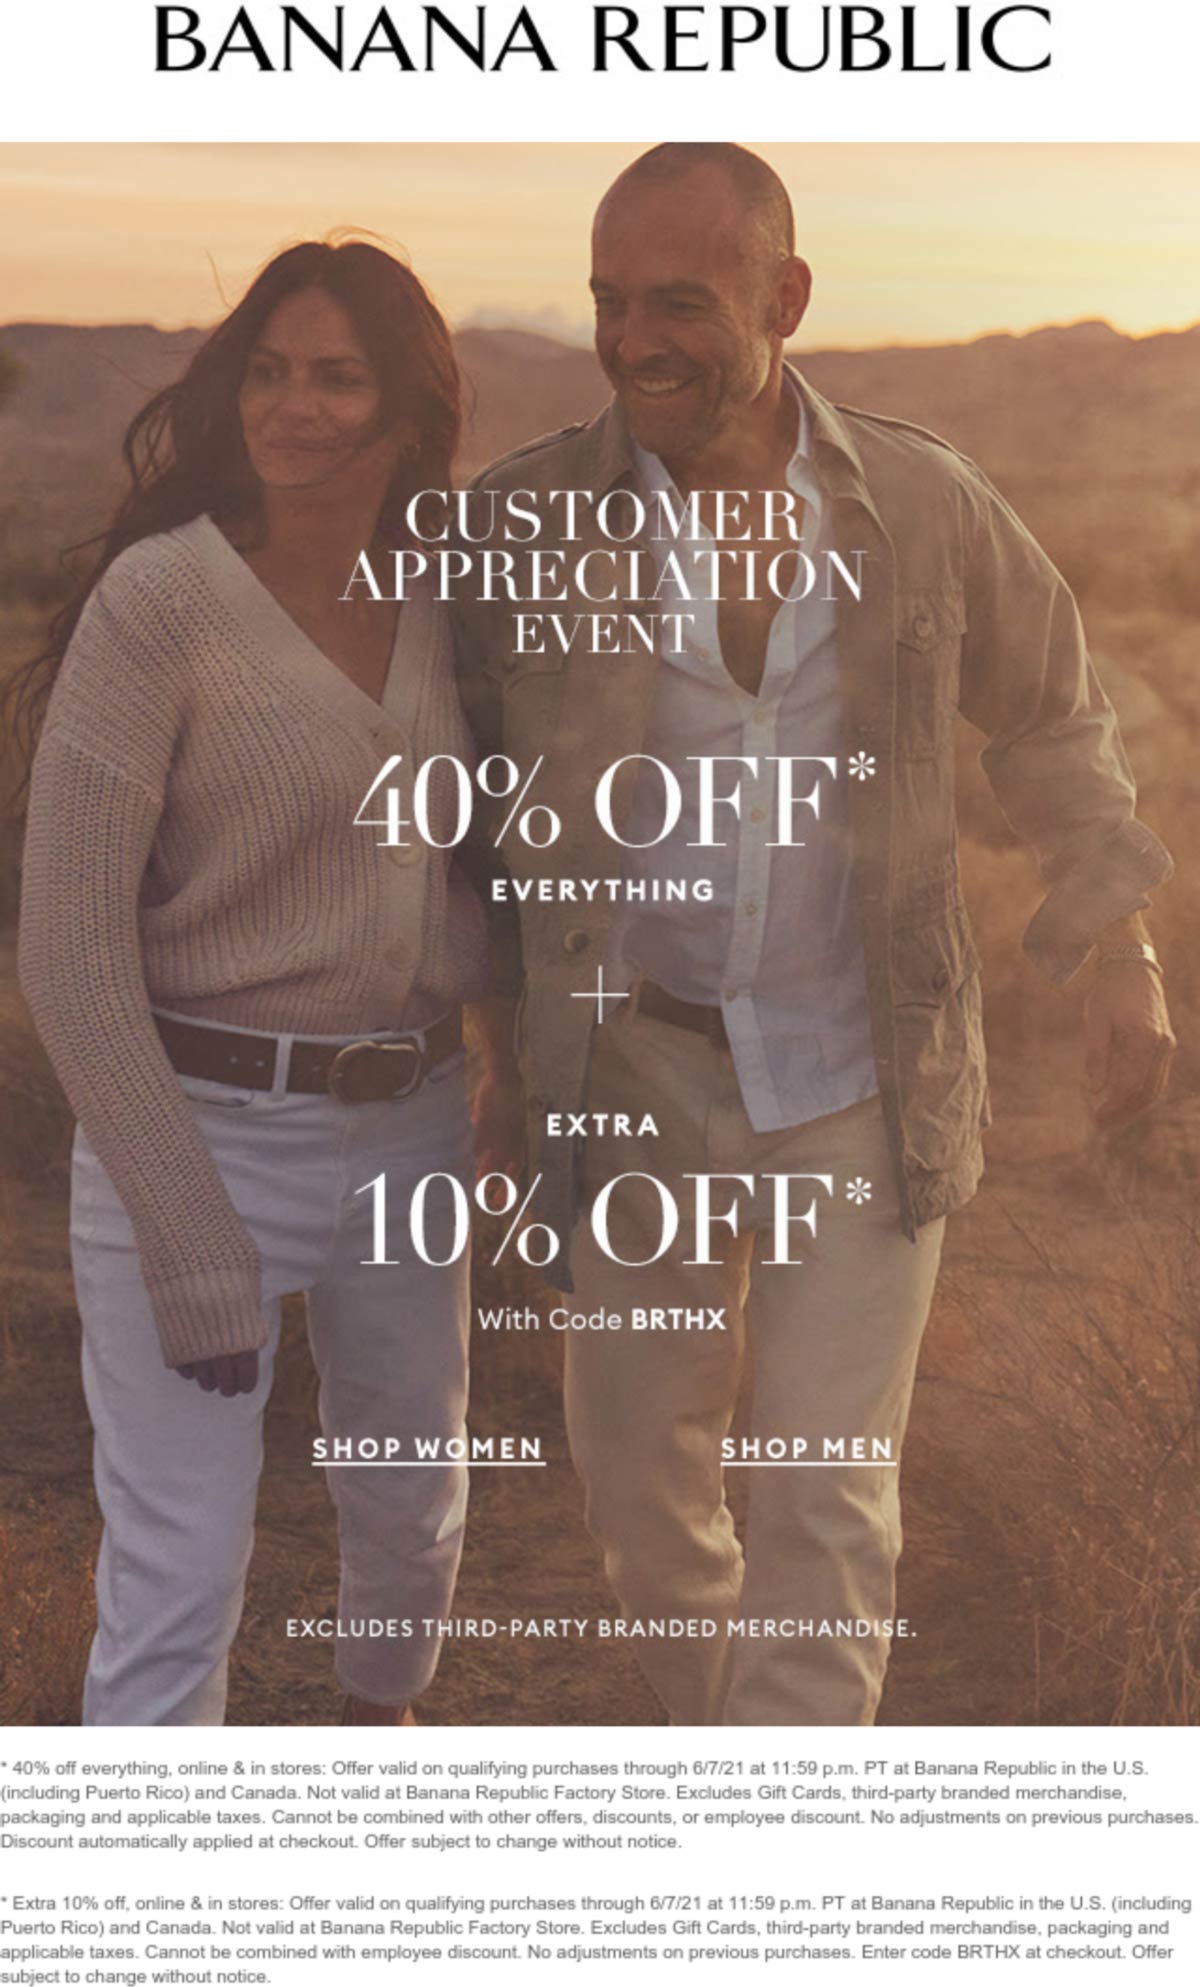 50 off everything at Banana Republic, or online via promo code BRTHX 